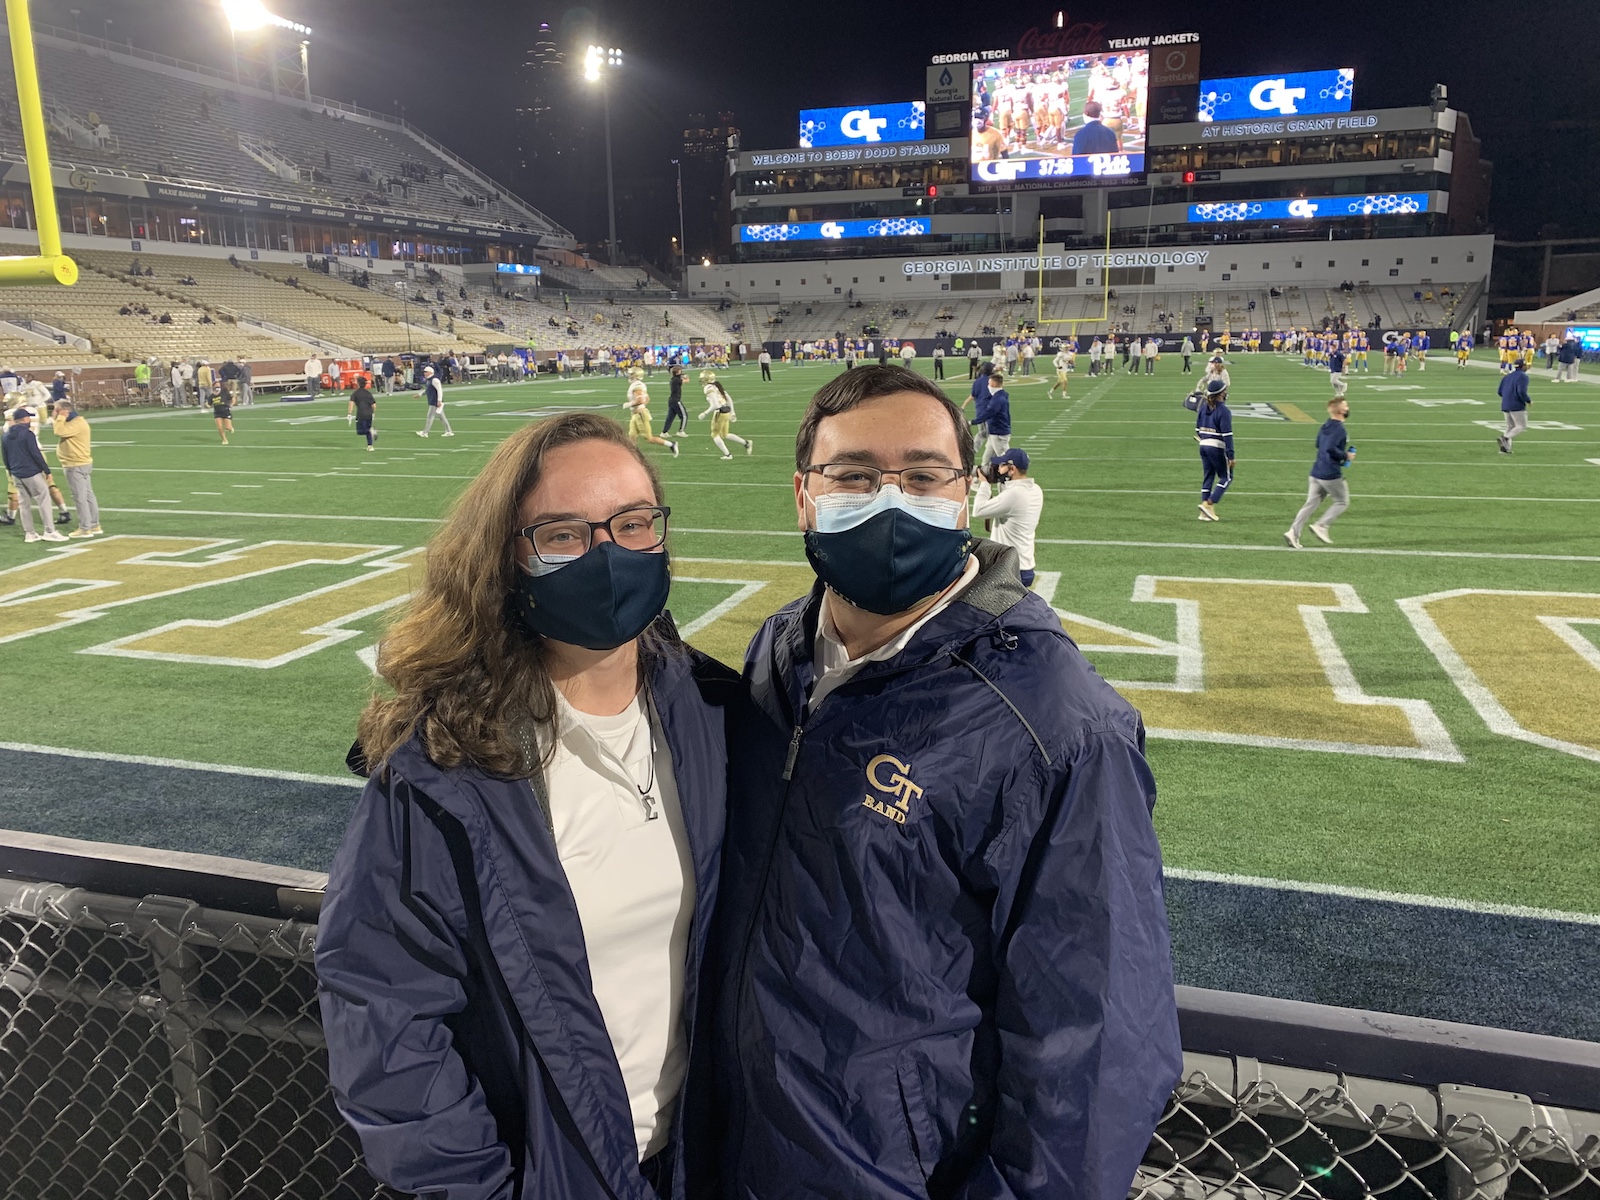 Grace Wyner is graduating with a bachelor's degree in literature, media, and communication. She is pictured at her last home football game with her boyfriend, Ben Goldenthal.